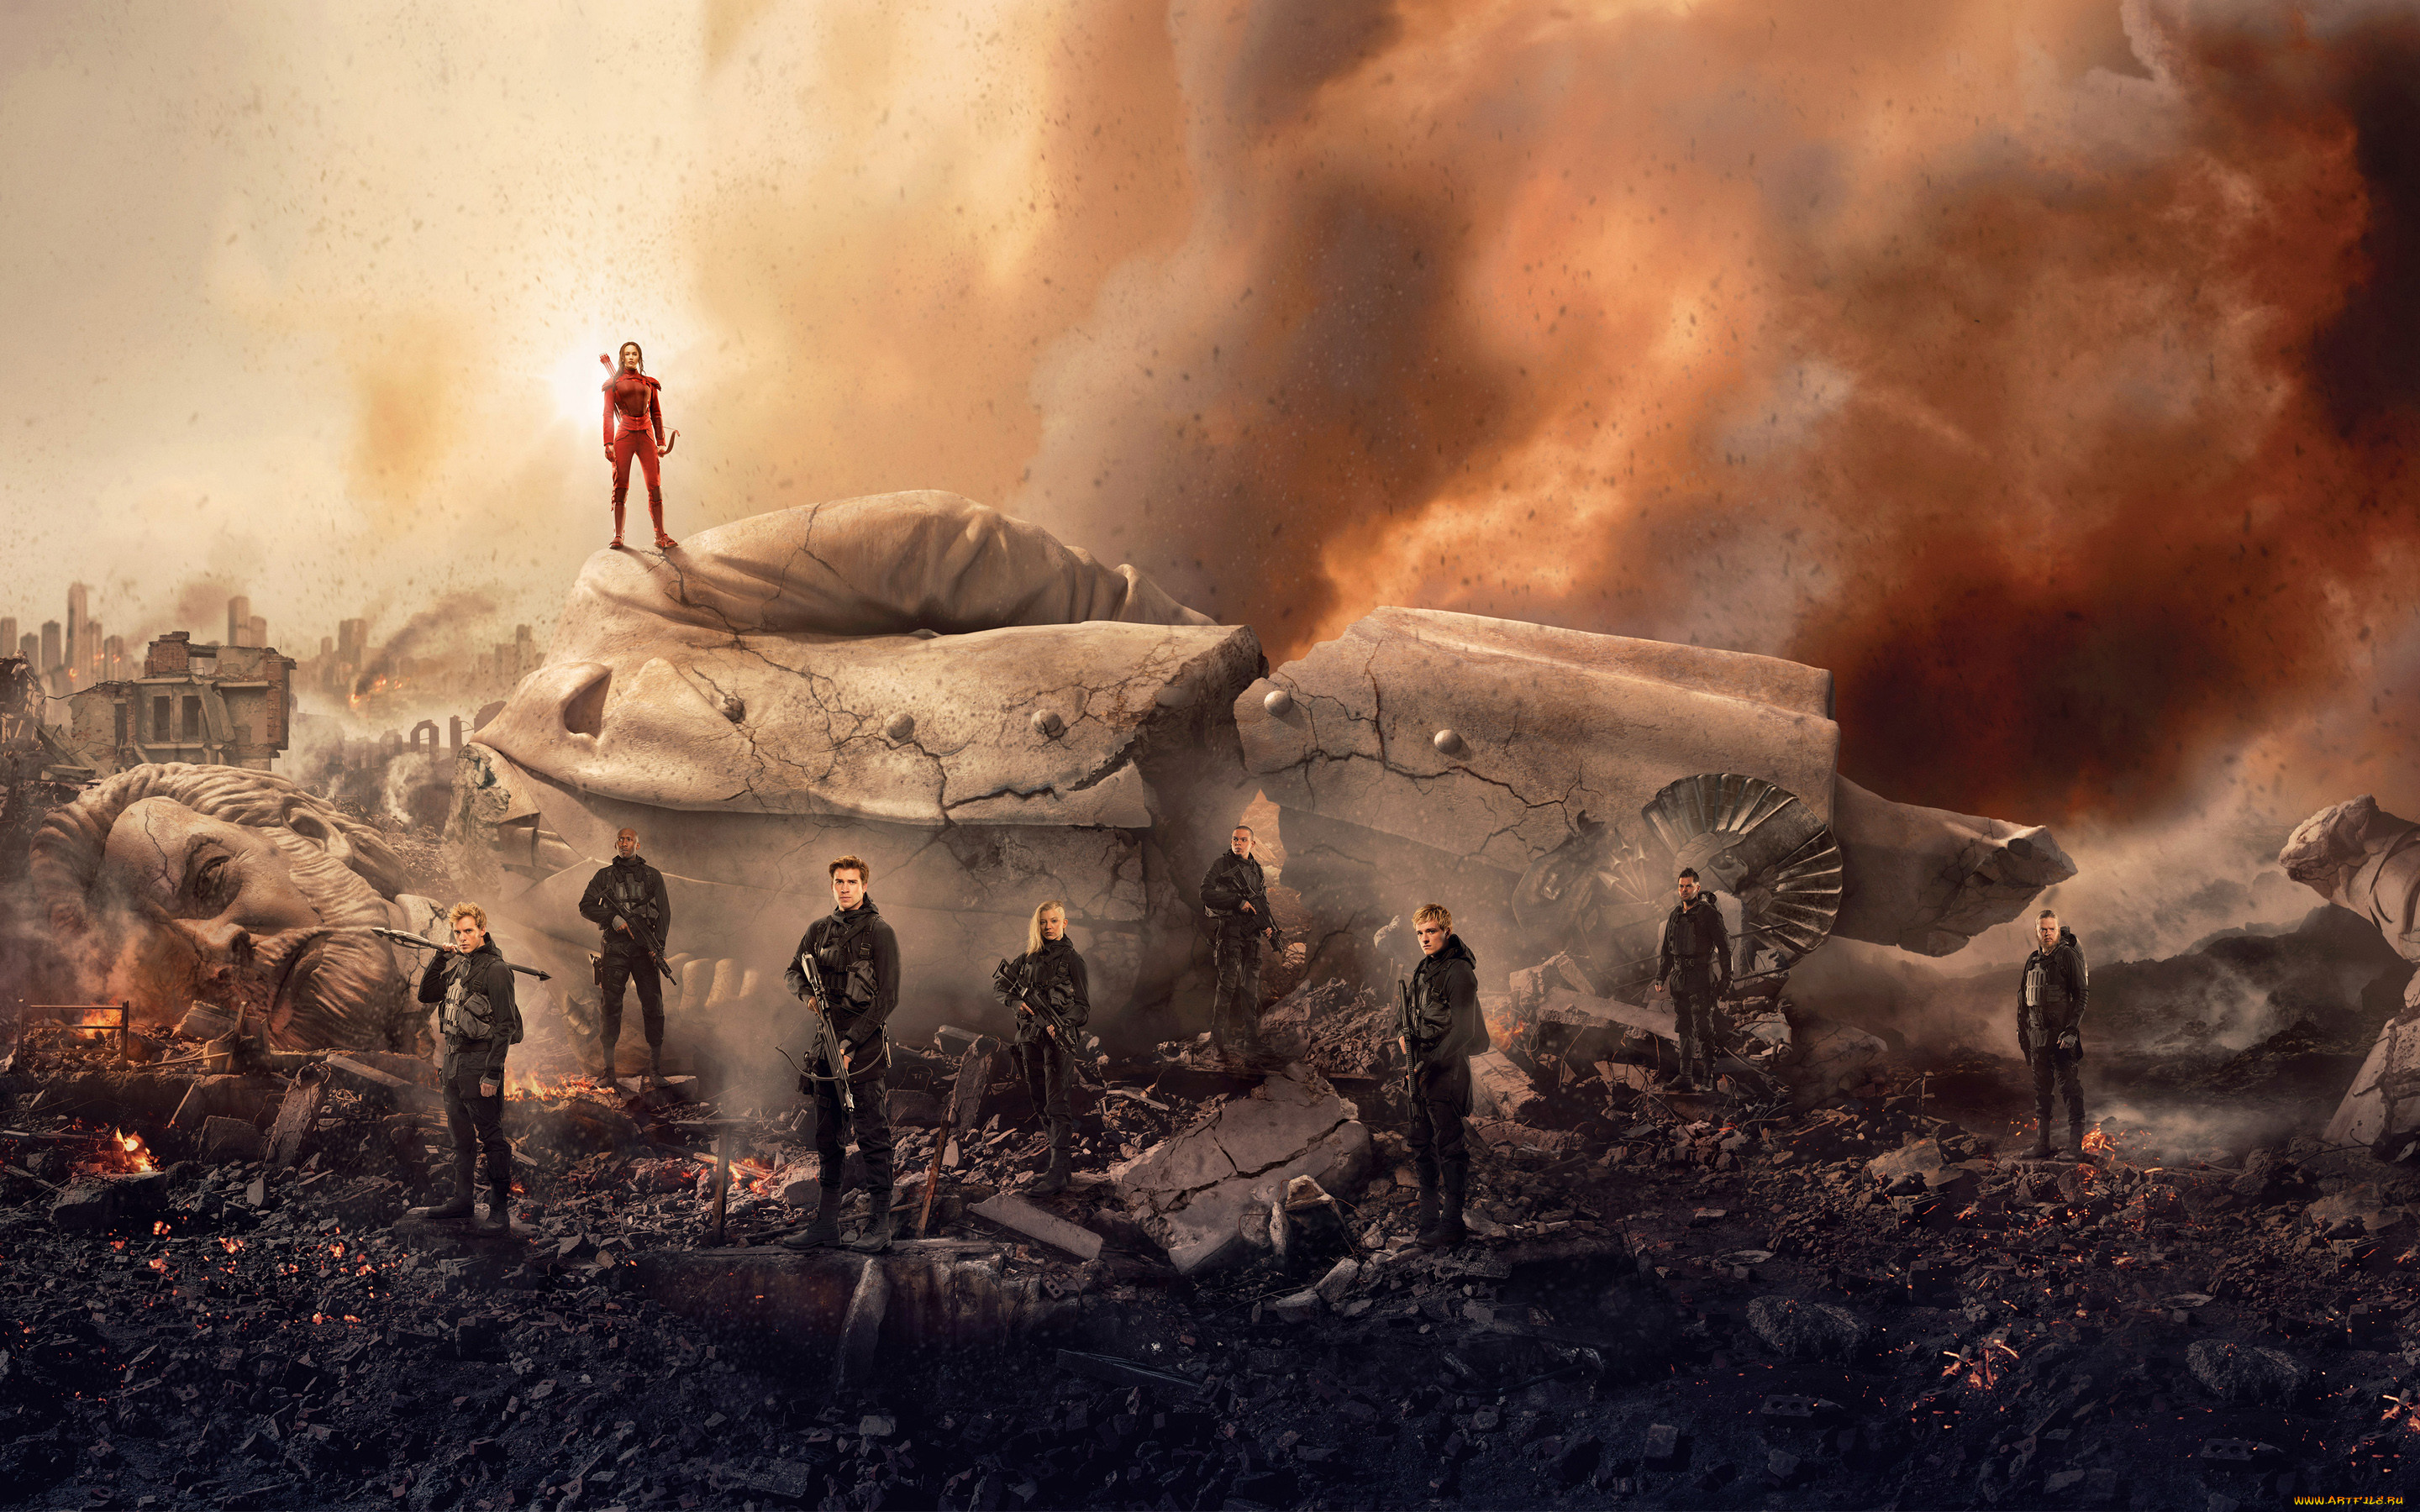  , the hunger games,  mockingjay - part 2, , , , the, hunger, games, mockingjay, -, part, 2